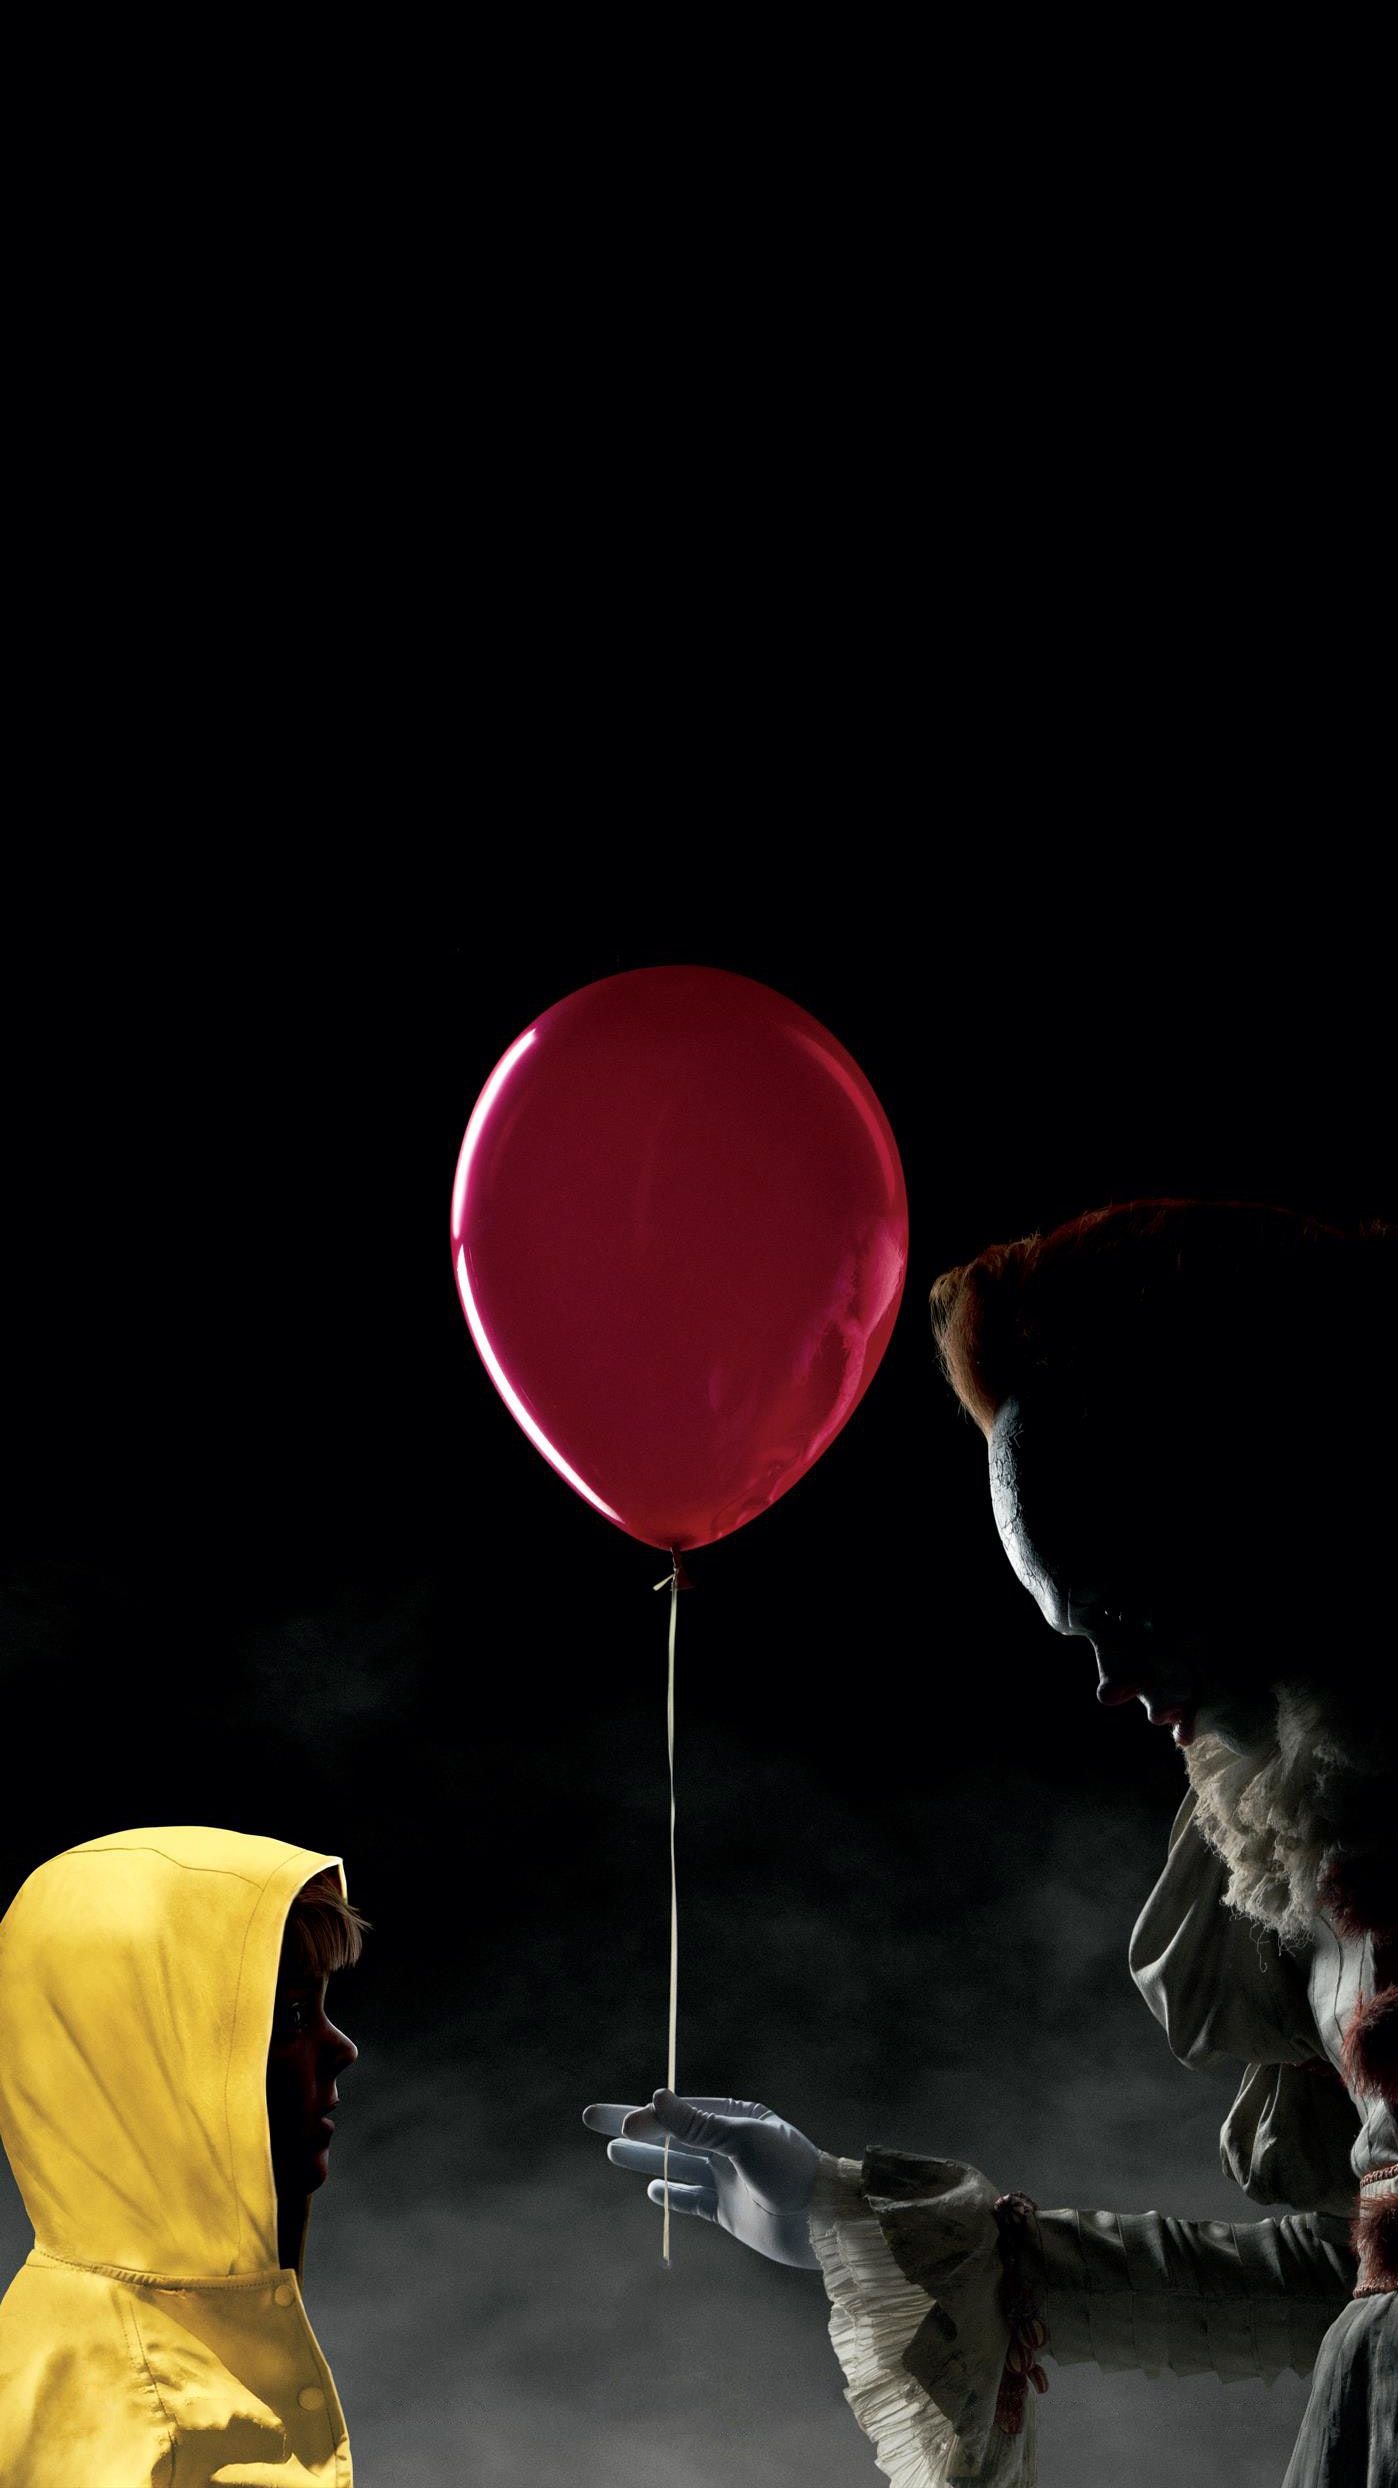 It 2017 Wallpapers